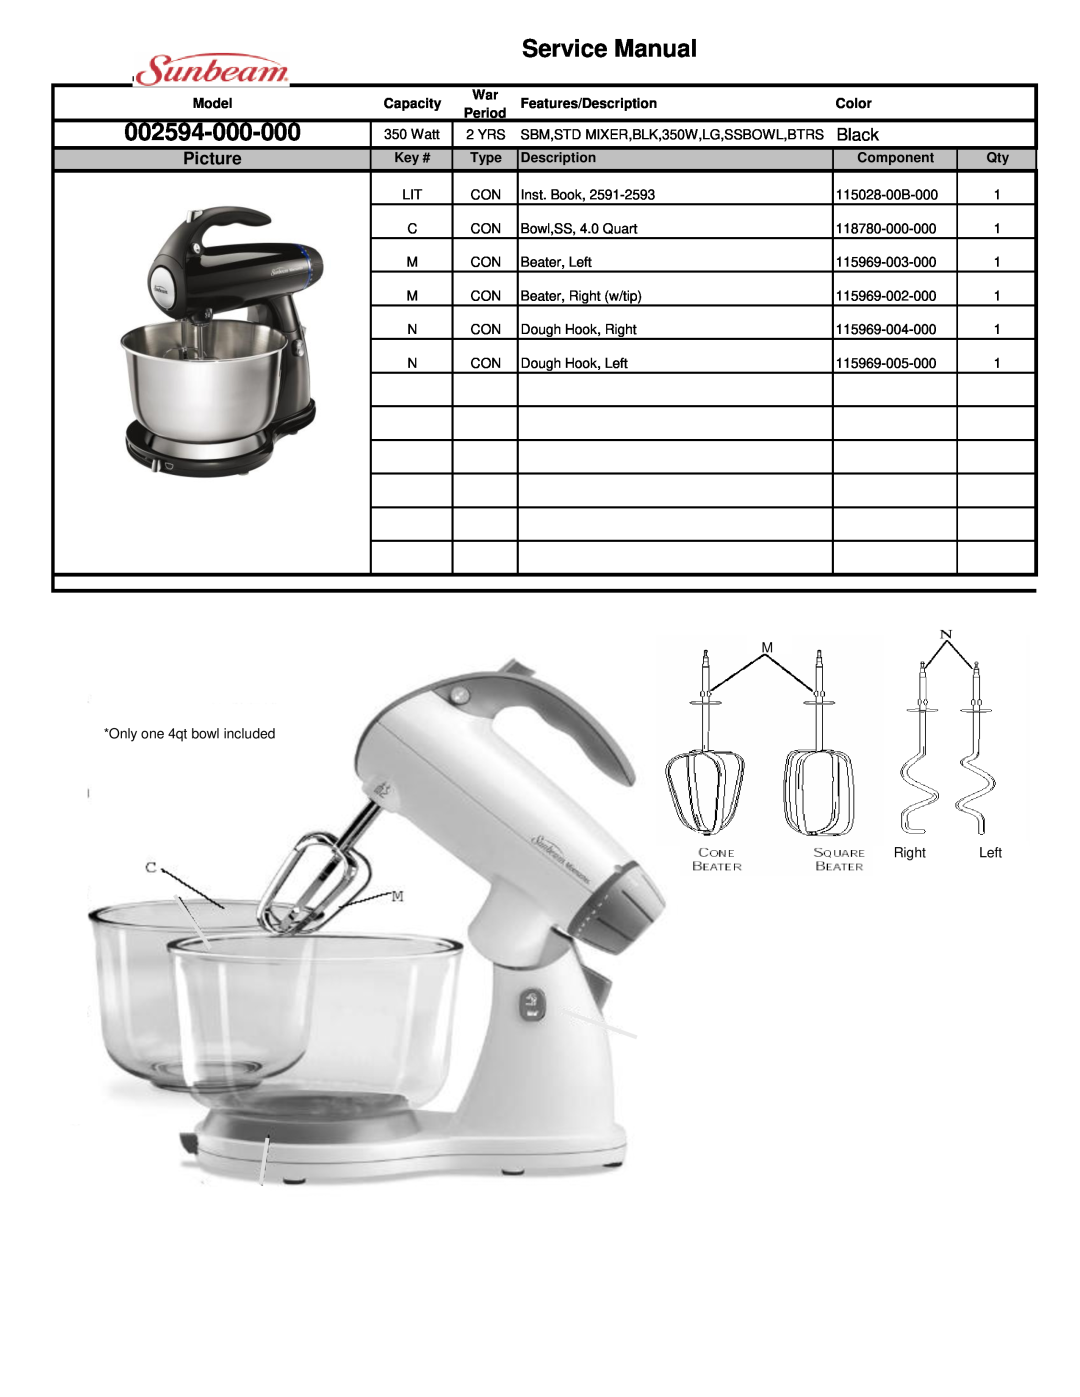 Sunbeam 002594-000-000 service manual Black, Picture, M Only one 4qt bowl included, Right Left, Model, Capacity, Color 